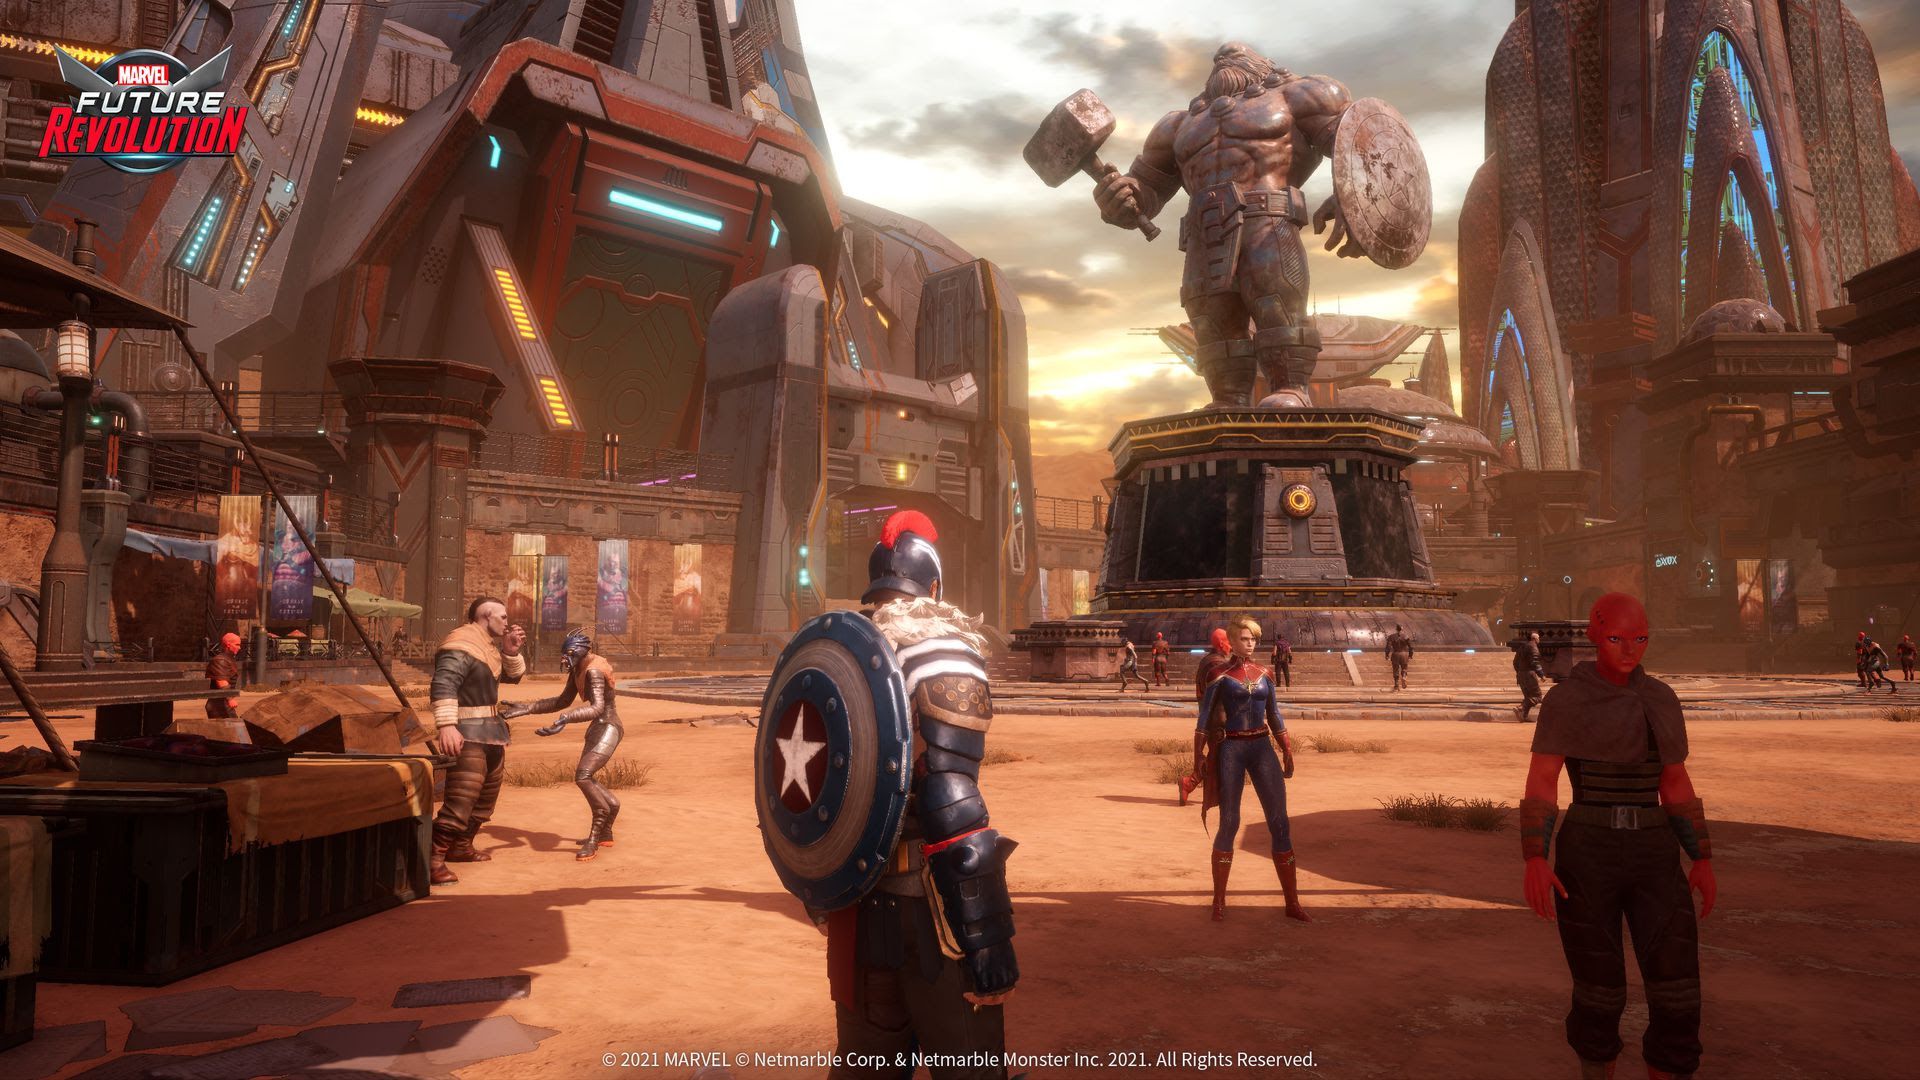 Screenshot from the video game Marvel Future Revolution